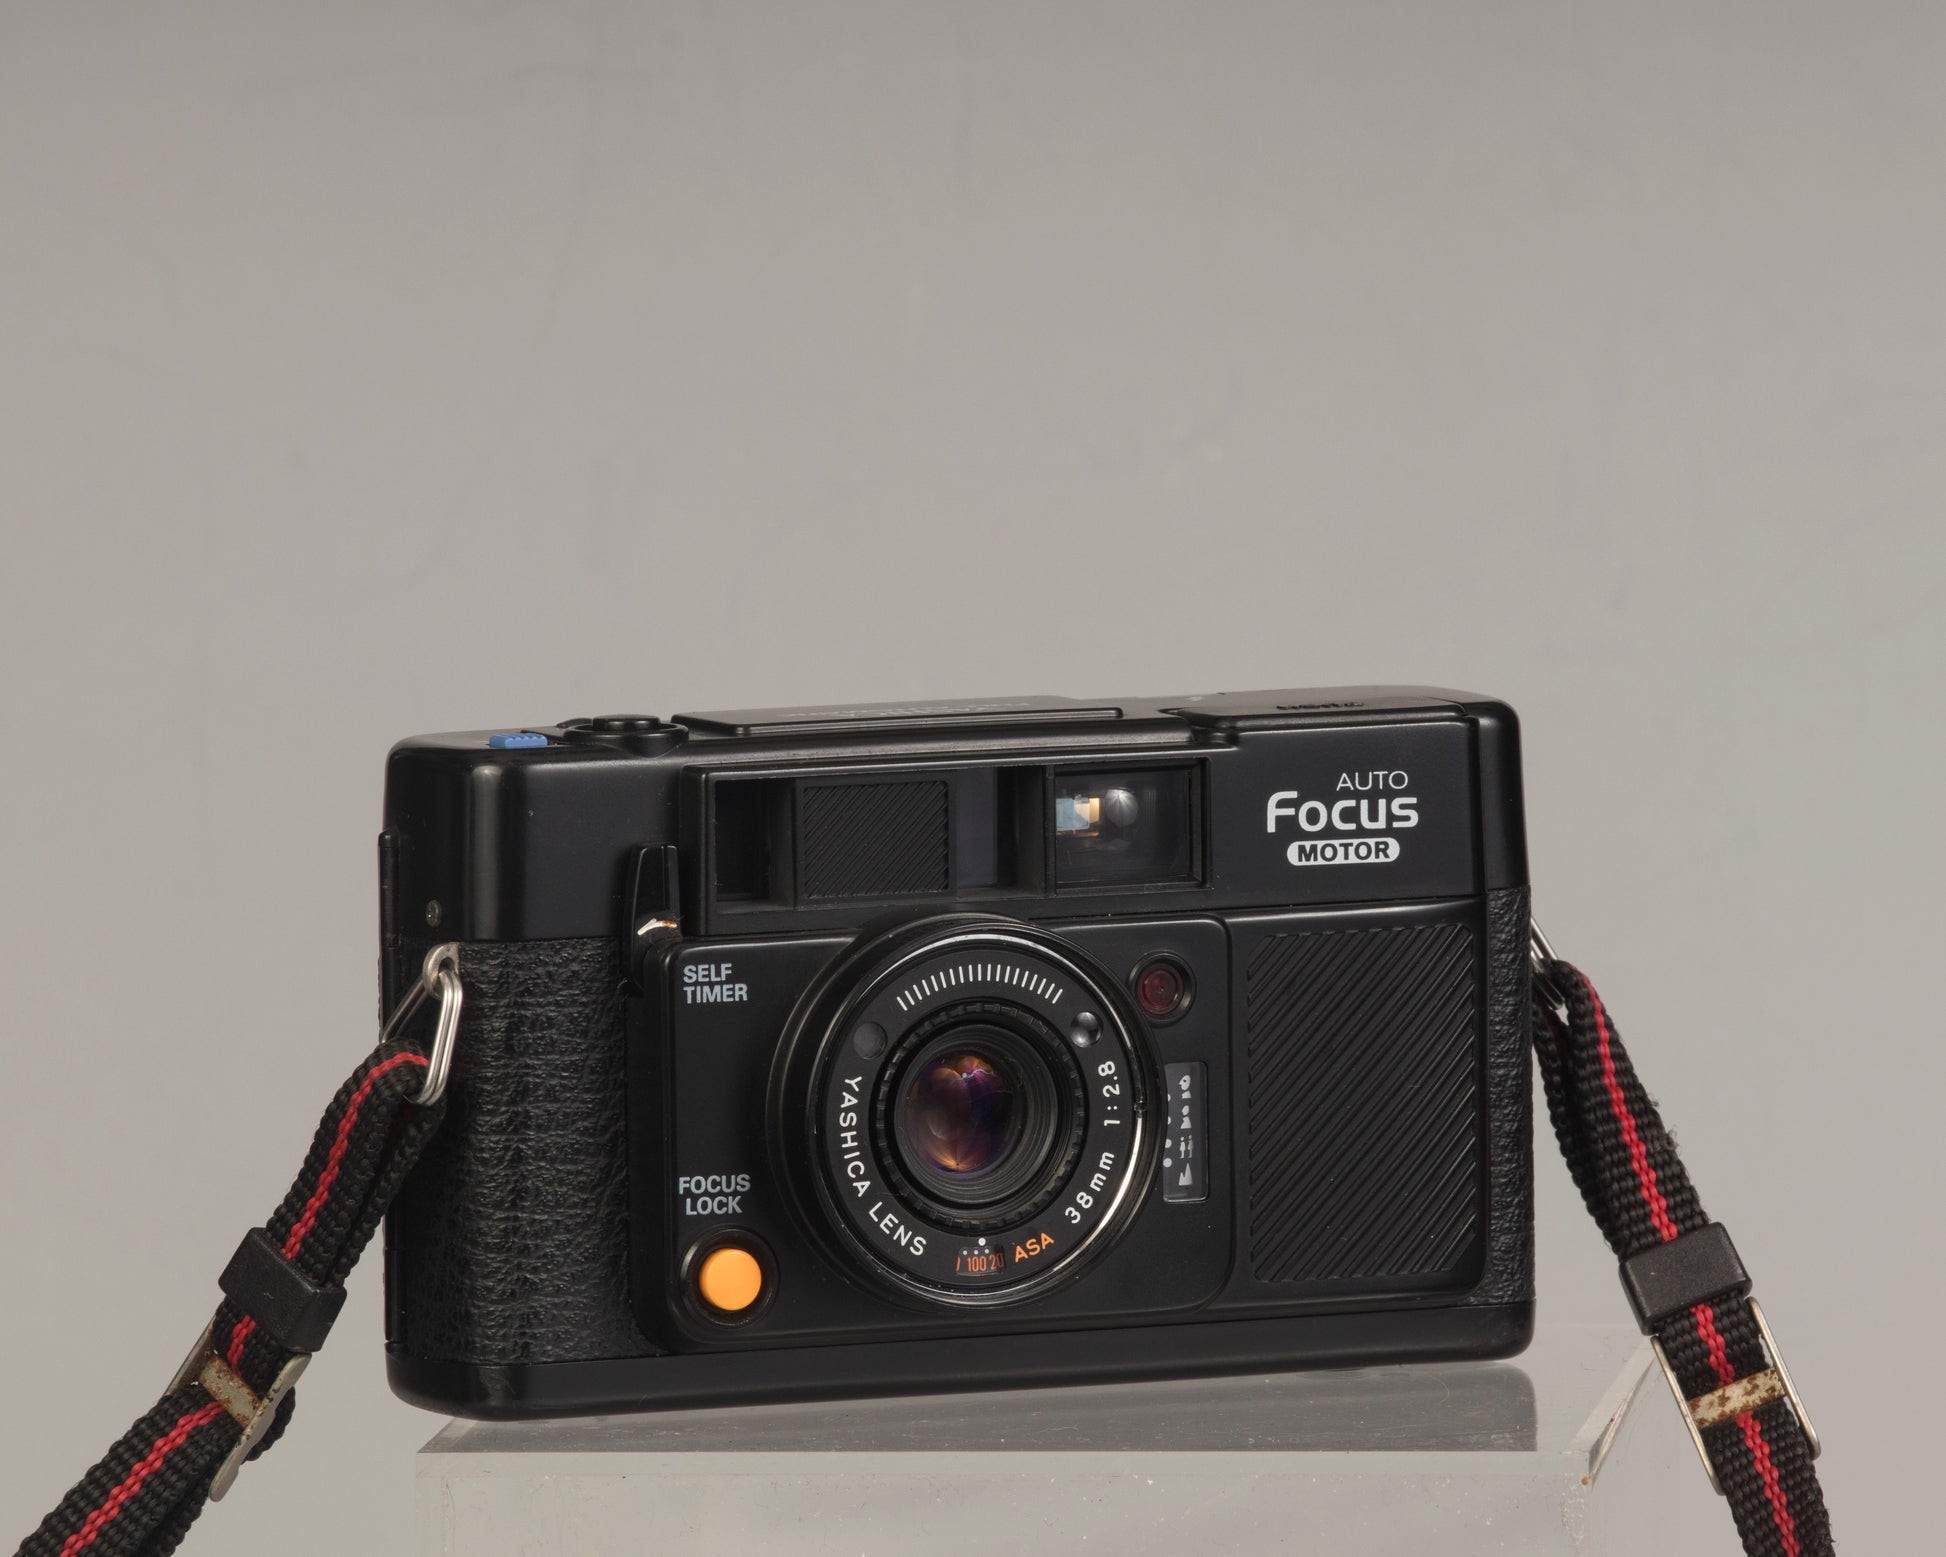 The Yashica Auto Focus Motor is a classic 35mm point-and-shoot film camera featuring a 38mm f2.8 lens